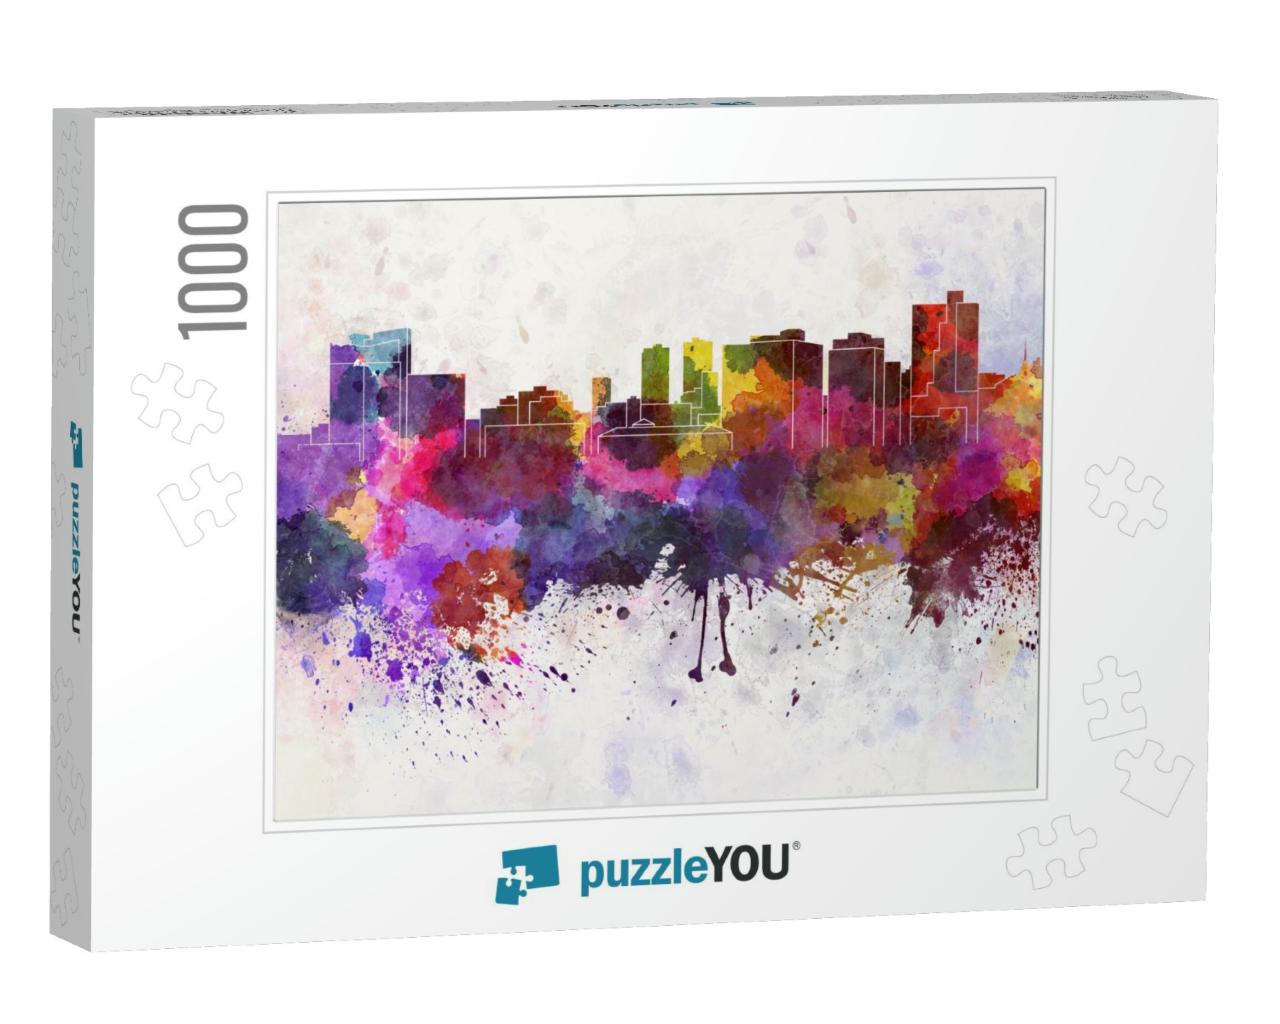 Fort Worth Skyline in Watercolor Background... Jigsaw Puzzle with 1000 pieces